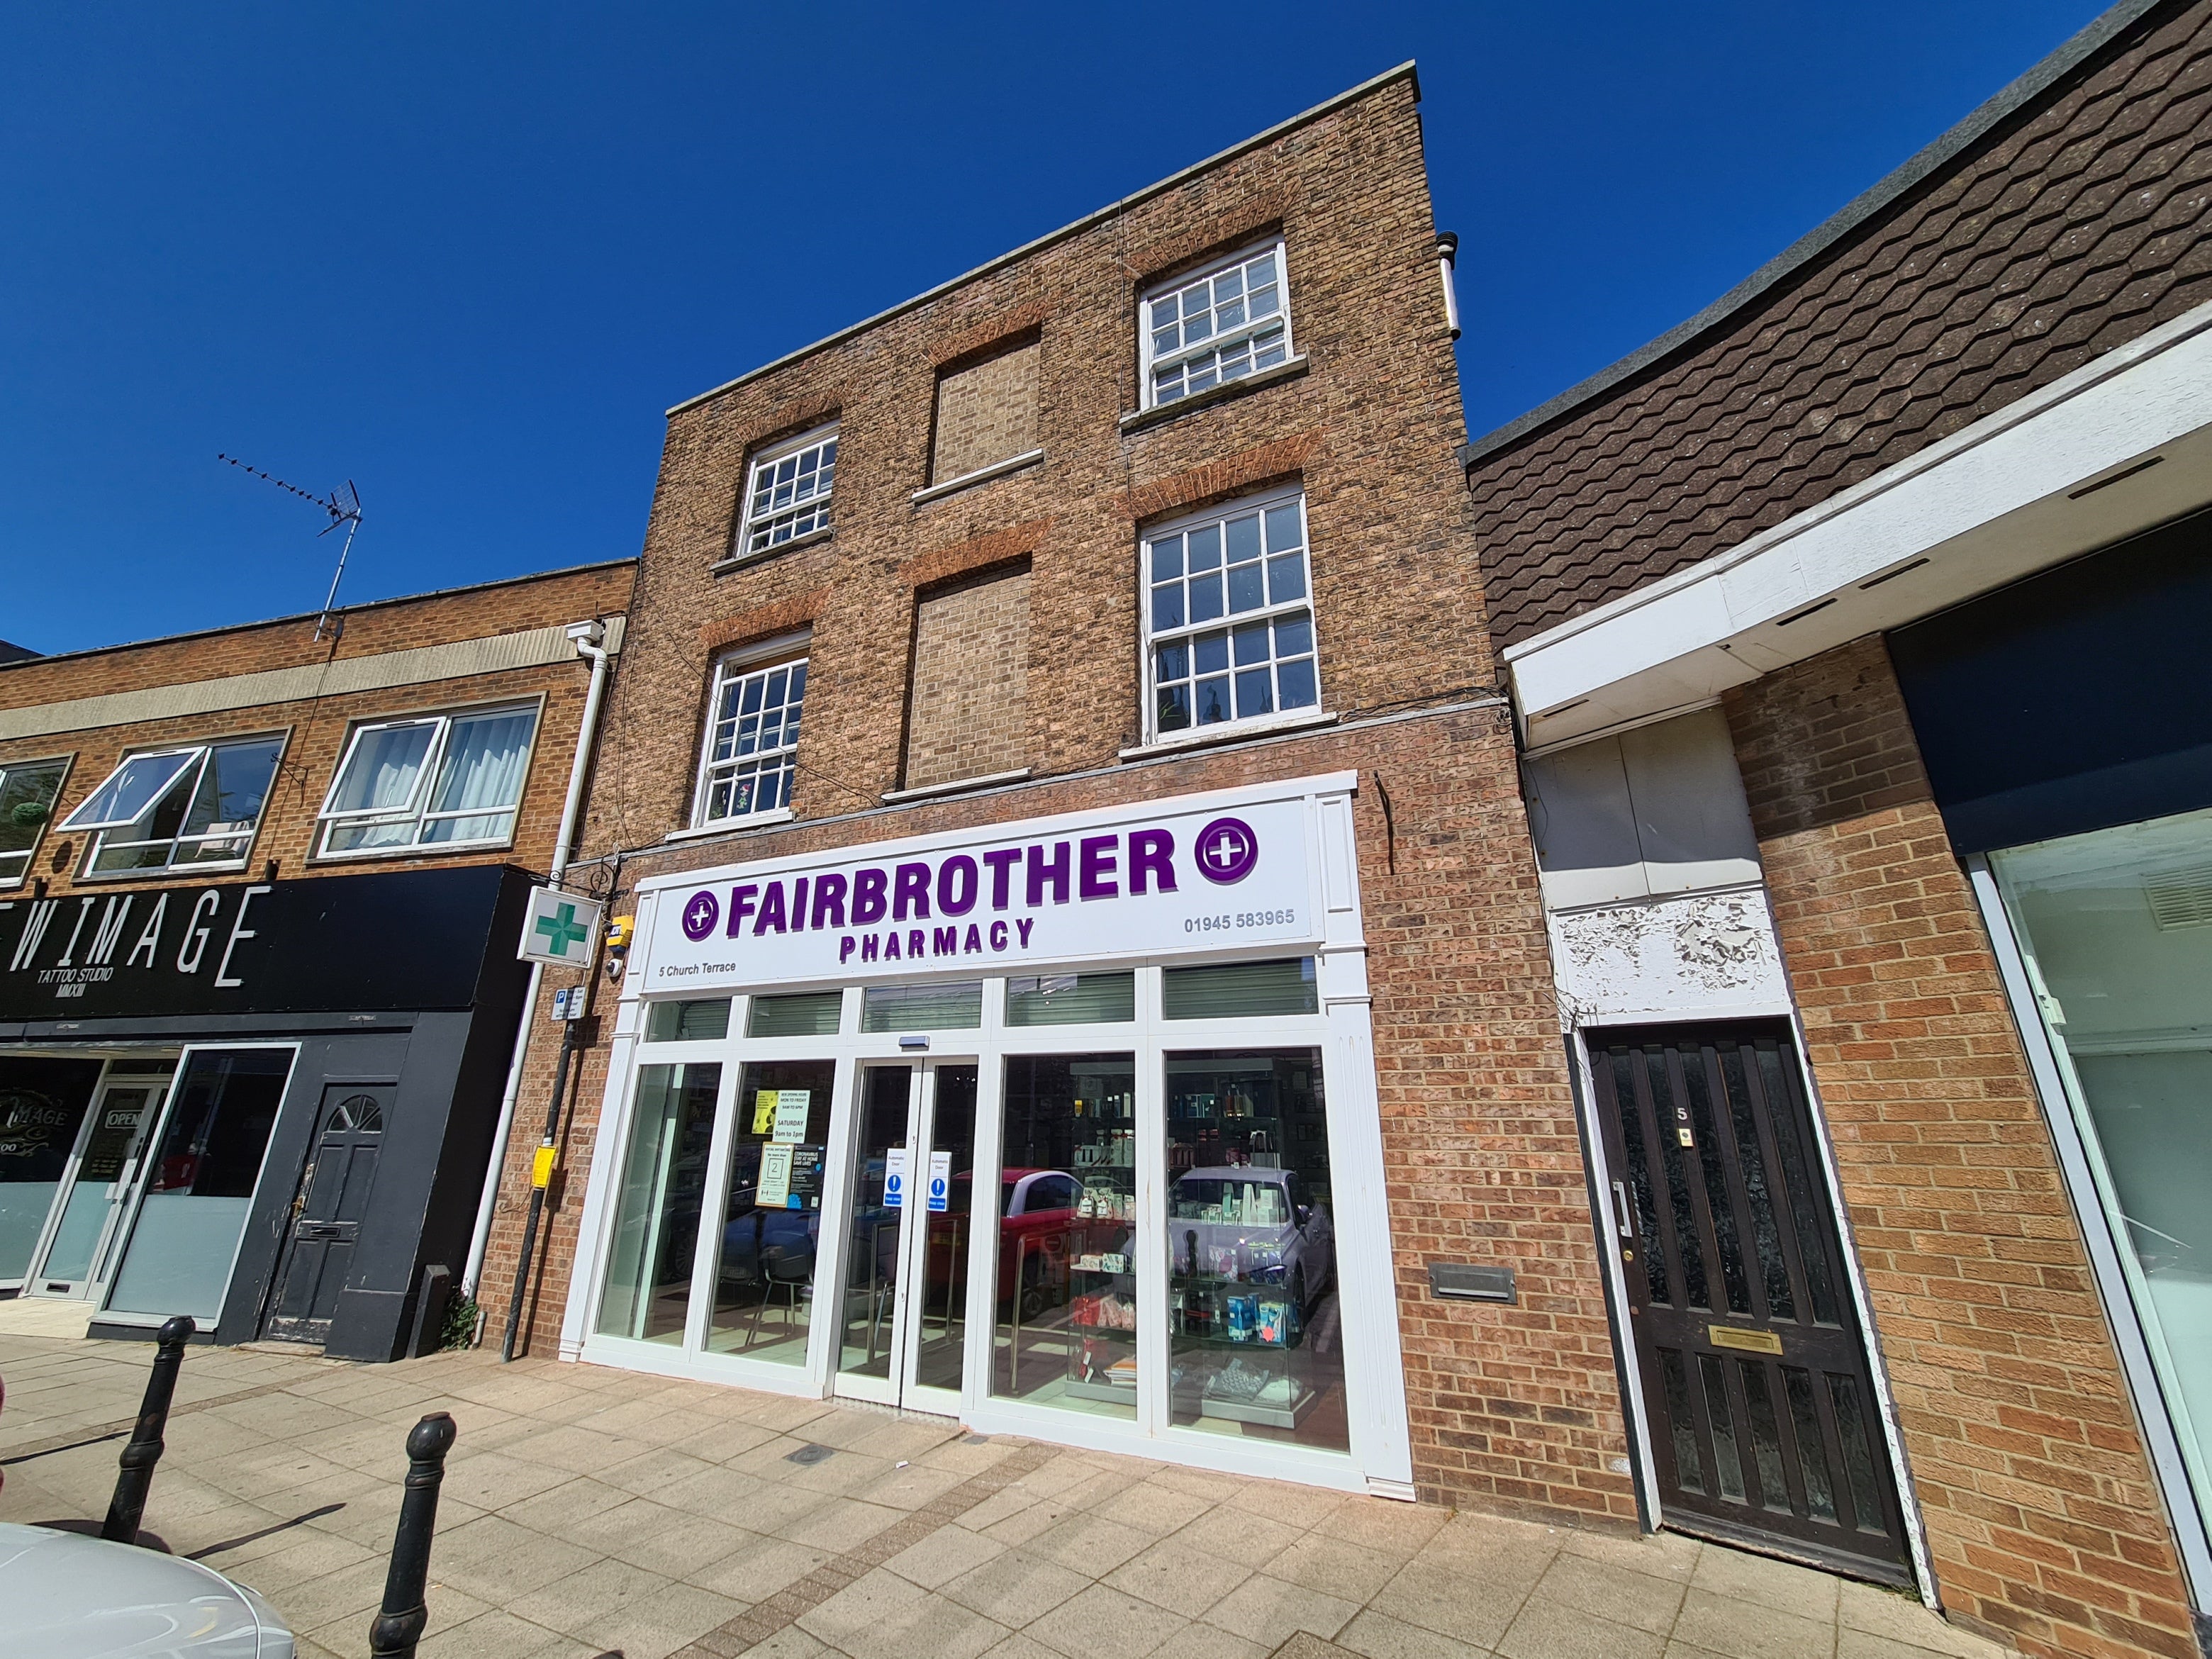 Fairbrother Pharmacy in Wisbech, Cambridgeshire